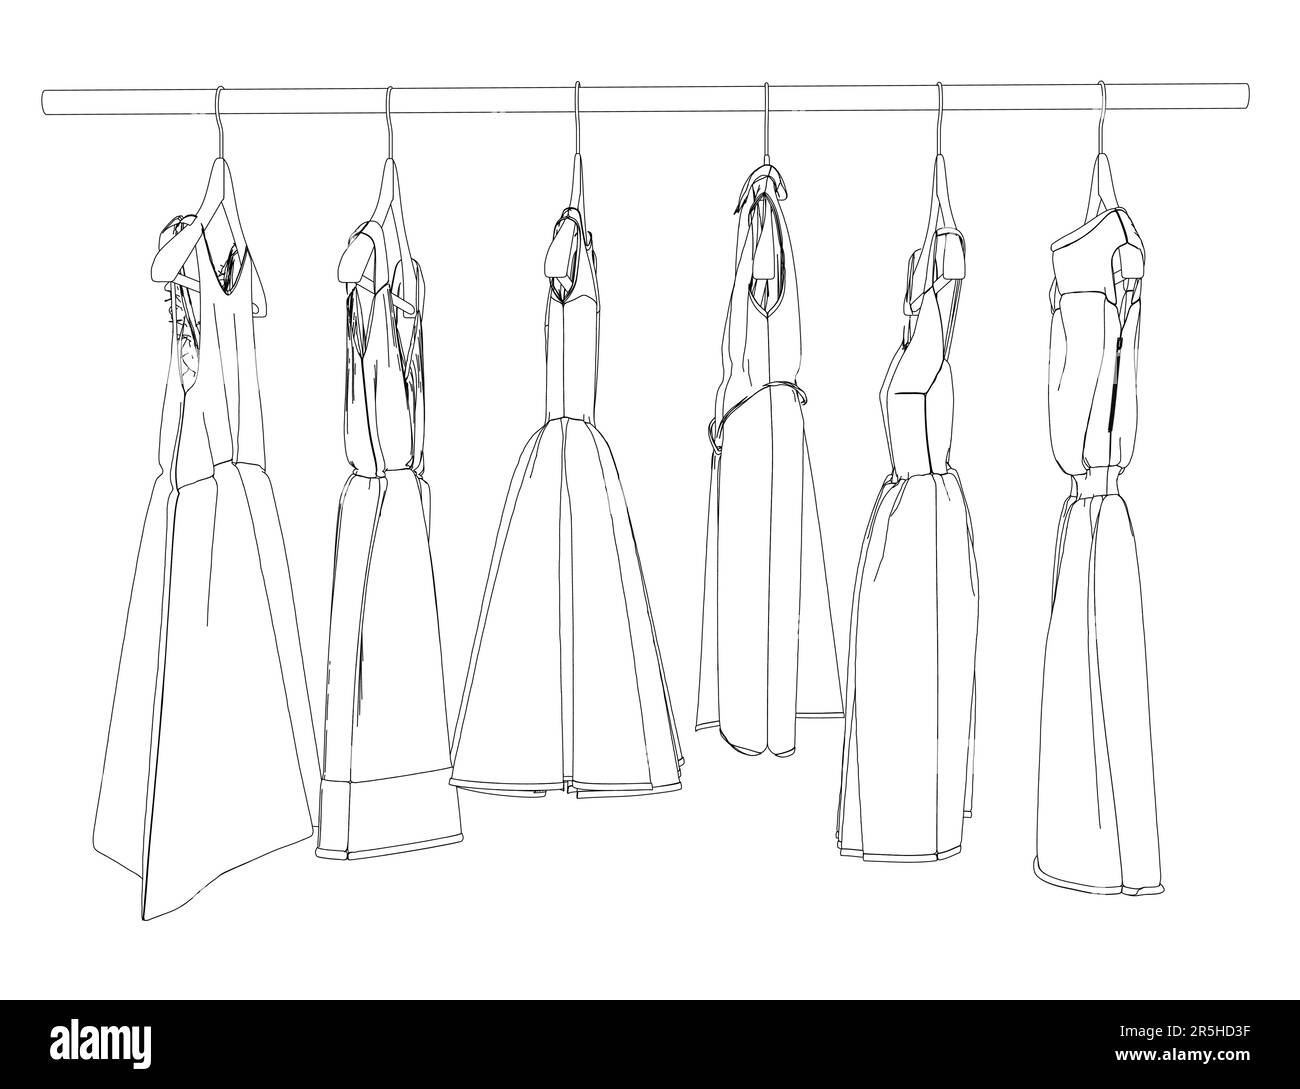 Outline of a set of women's dresses hanging on hangers isolated on a ...